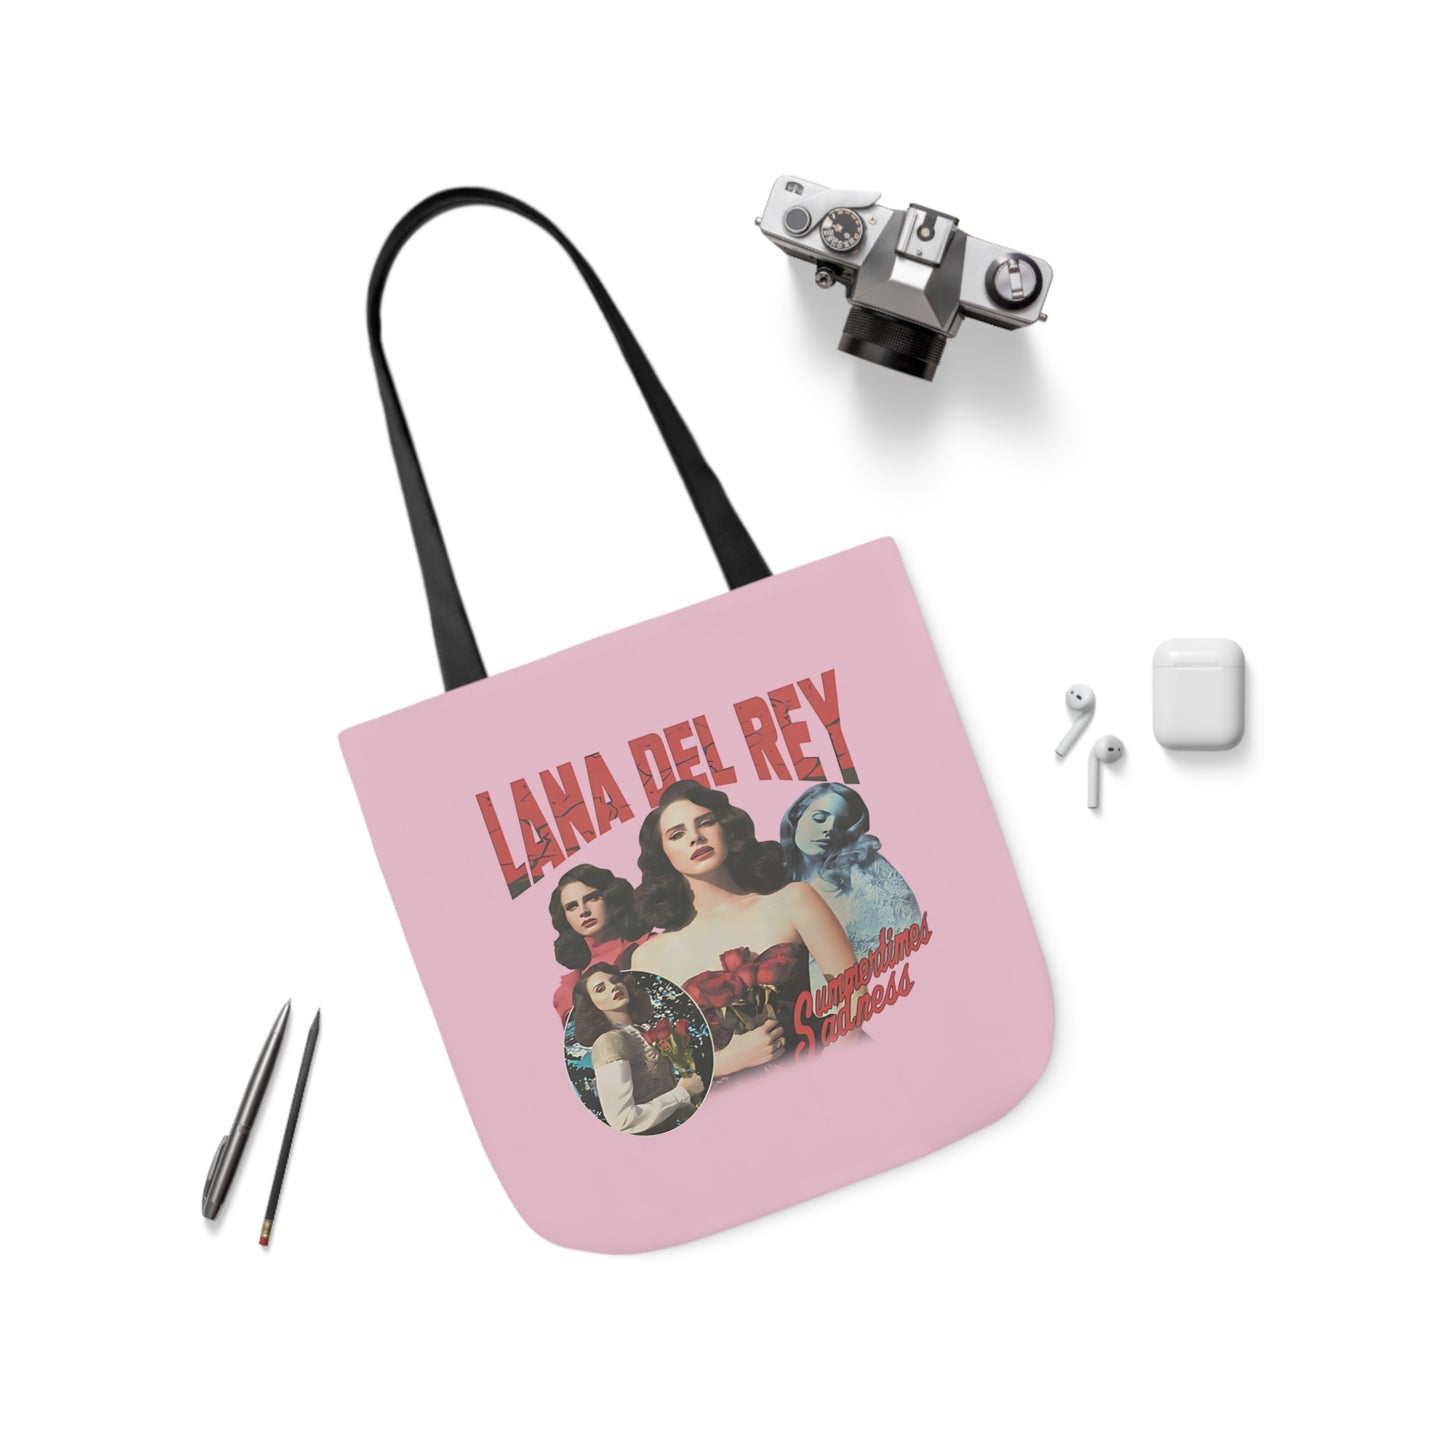 Lana Del Rey Summertime Sadness Polyester Canvas Tote Bag